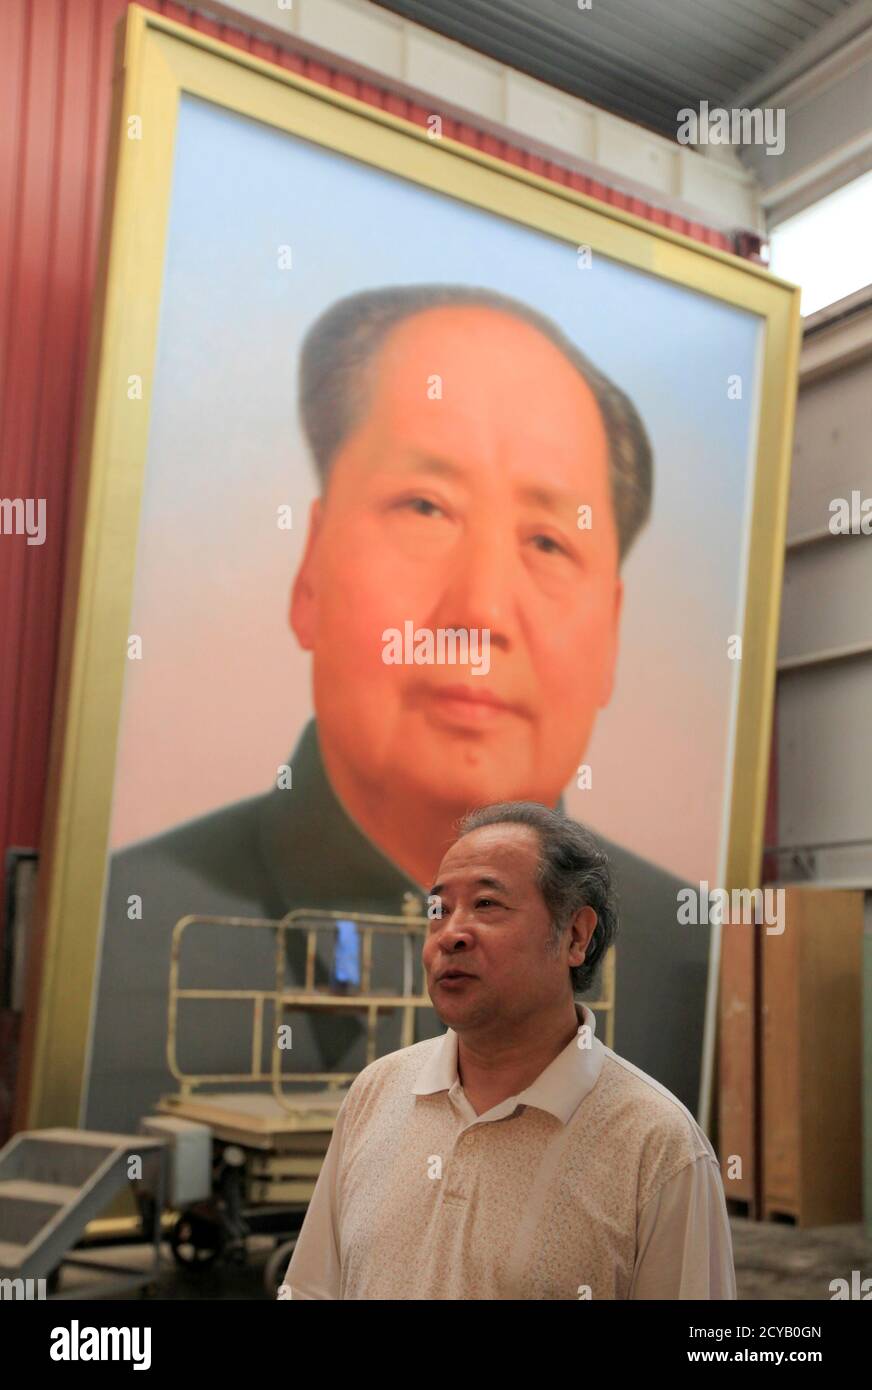 Ge Xiaoguang speaks in front of a giant portrait of China's late Chairman Mao Zedong during a interview with Reuters in his working studio located between the Tiananmen Square and the Forbidden City in Beijing June 29, 2011. Reclusive Chinese painter Ge's art has gazed over one of the world's most famous city squares for decades. For 30 years, he has painted the portraits of former paramount leader Mao Zedong that look across Beijing's Tiananmen Square. The giant oil paintings of the "Great Helmsman" have kept watch from the Gate of Heavenly Peace since the Communist Party won the civil war an Stock Photo